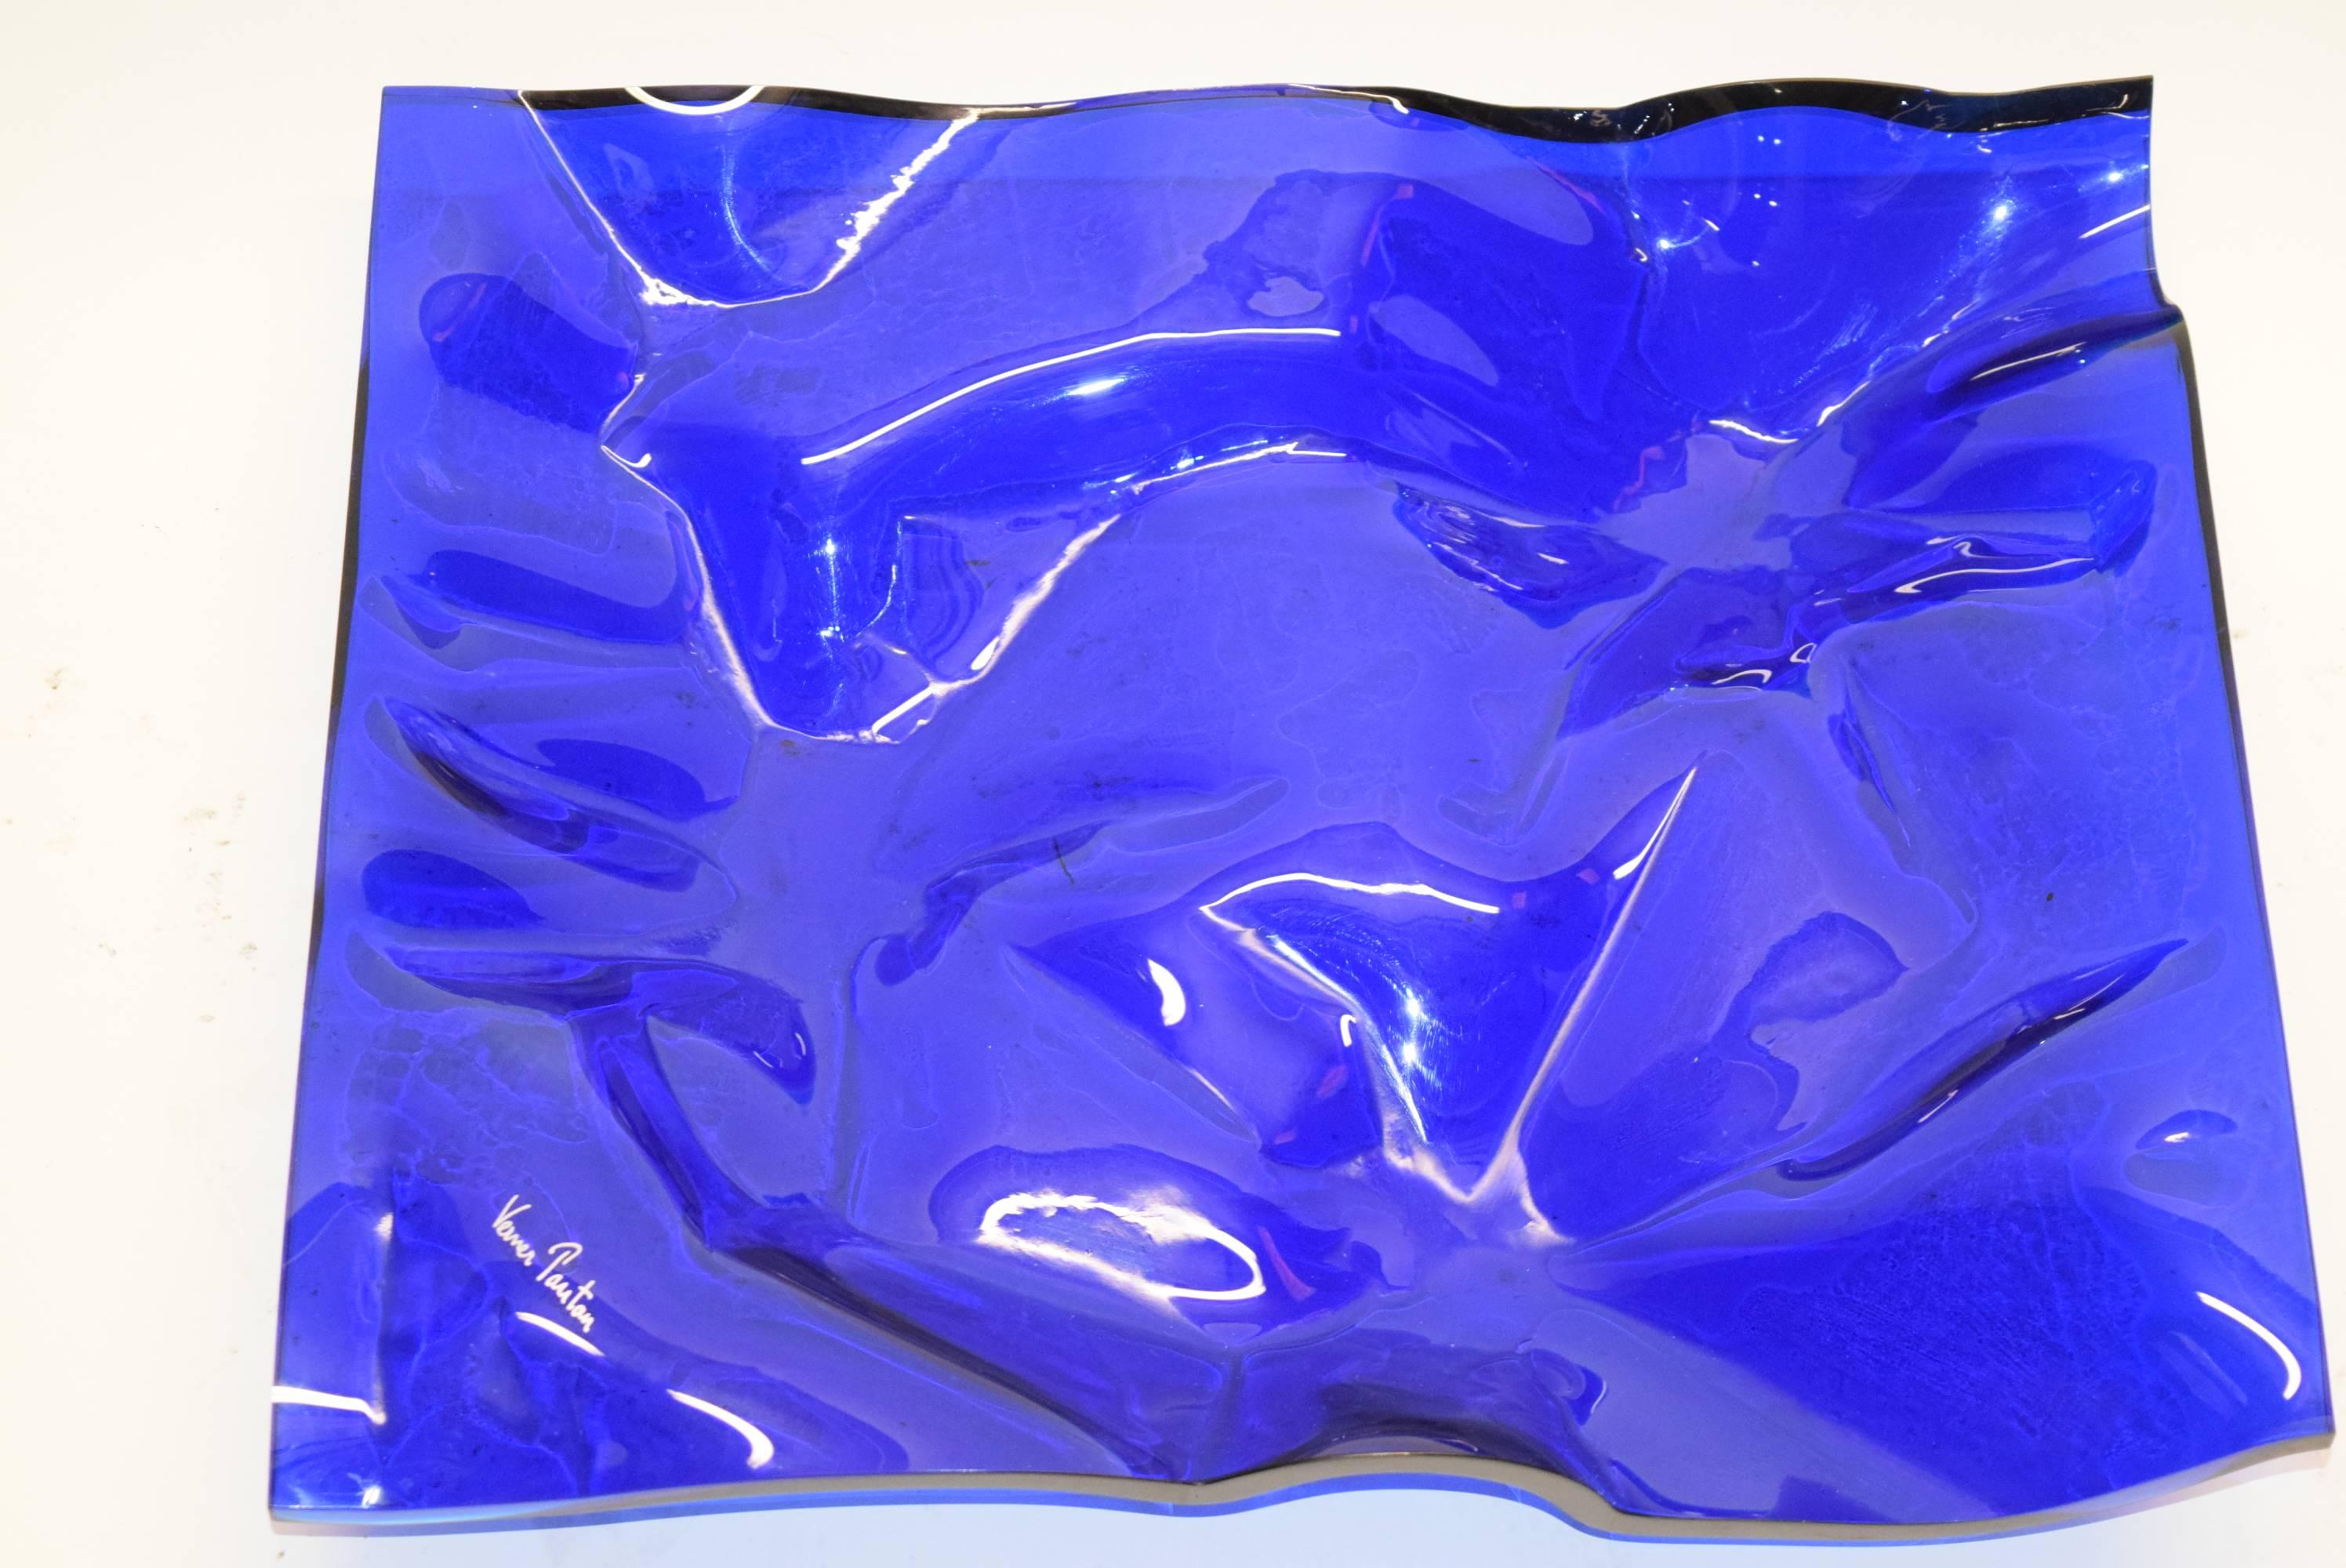 High polished blue acrylic fruit bowl designed by Verner Panton was manufactured by Dansk from 1988 to 1992. The blue edition is no longer available.